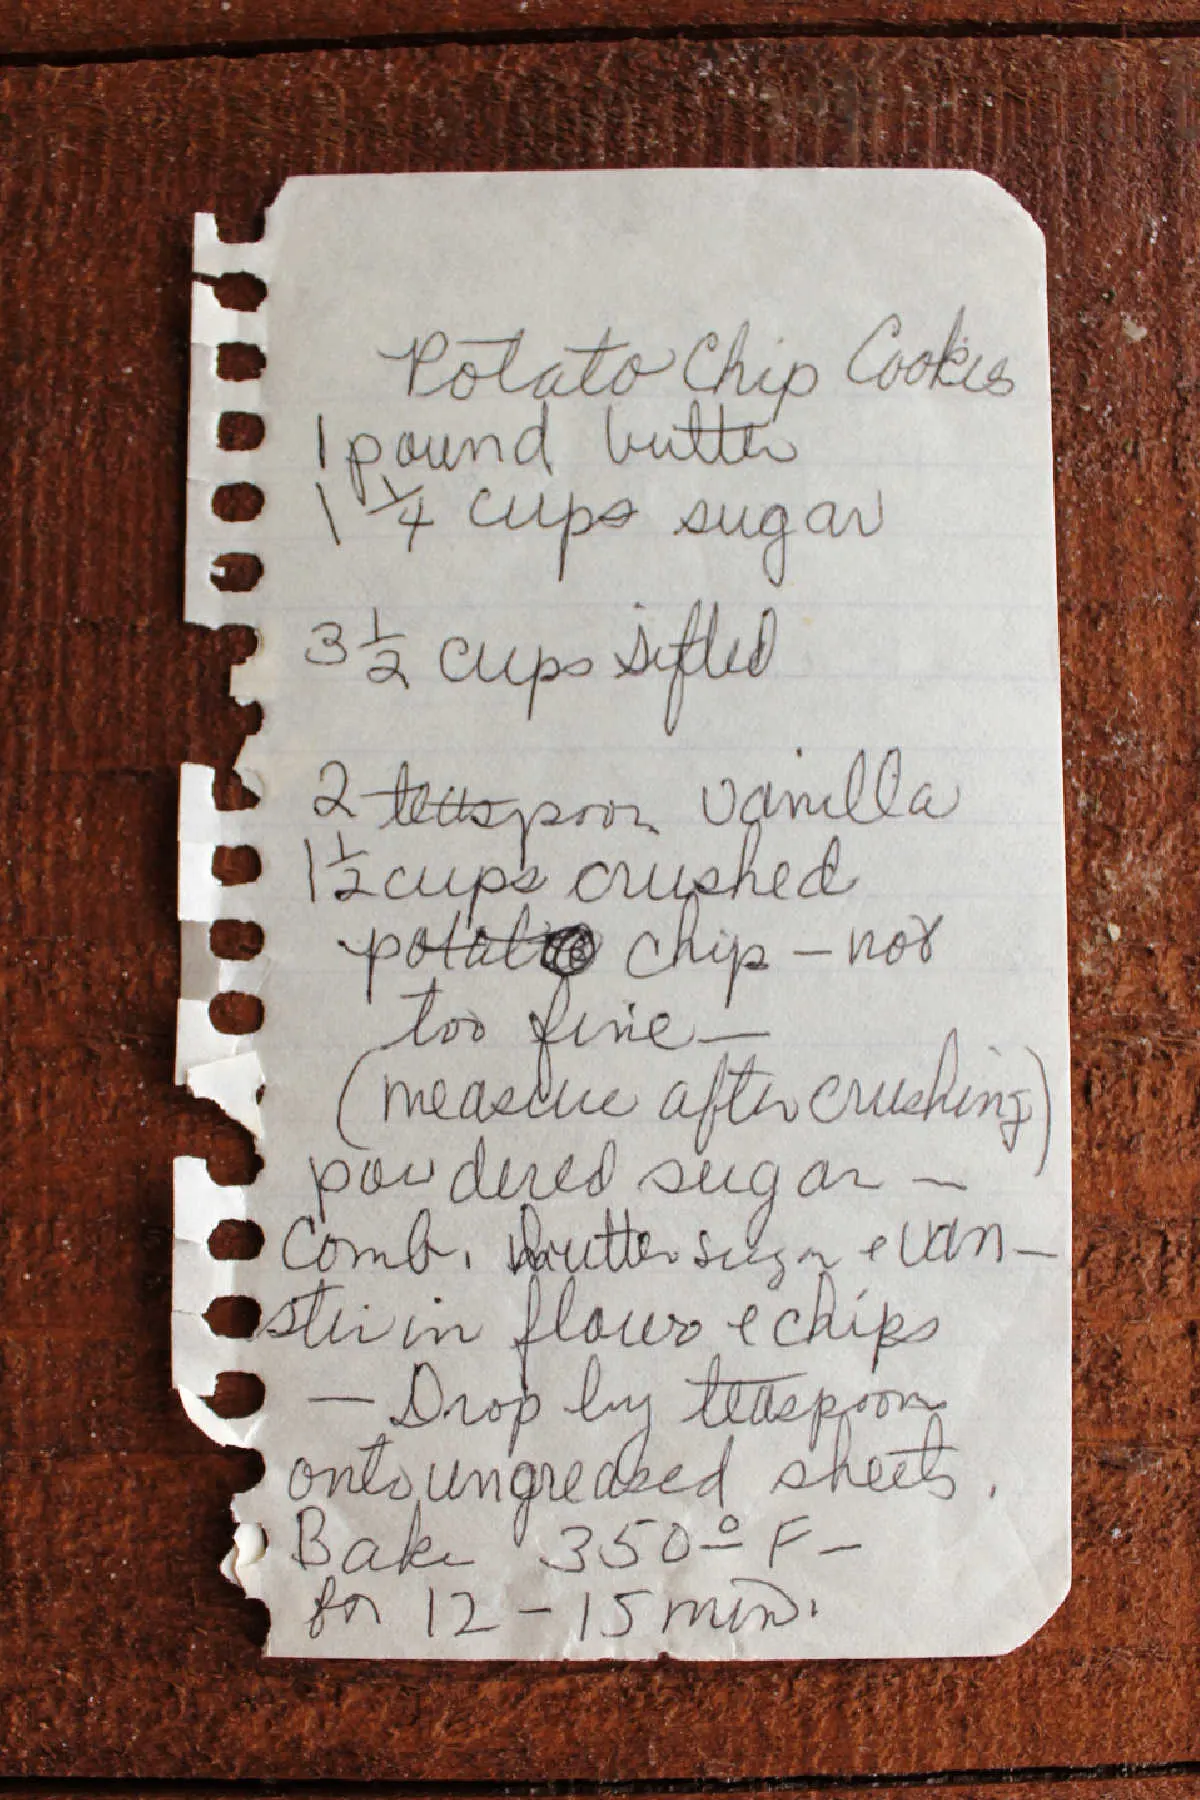 Handwritten potato chip cookie recipe on piece of small notepad paper.